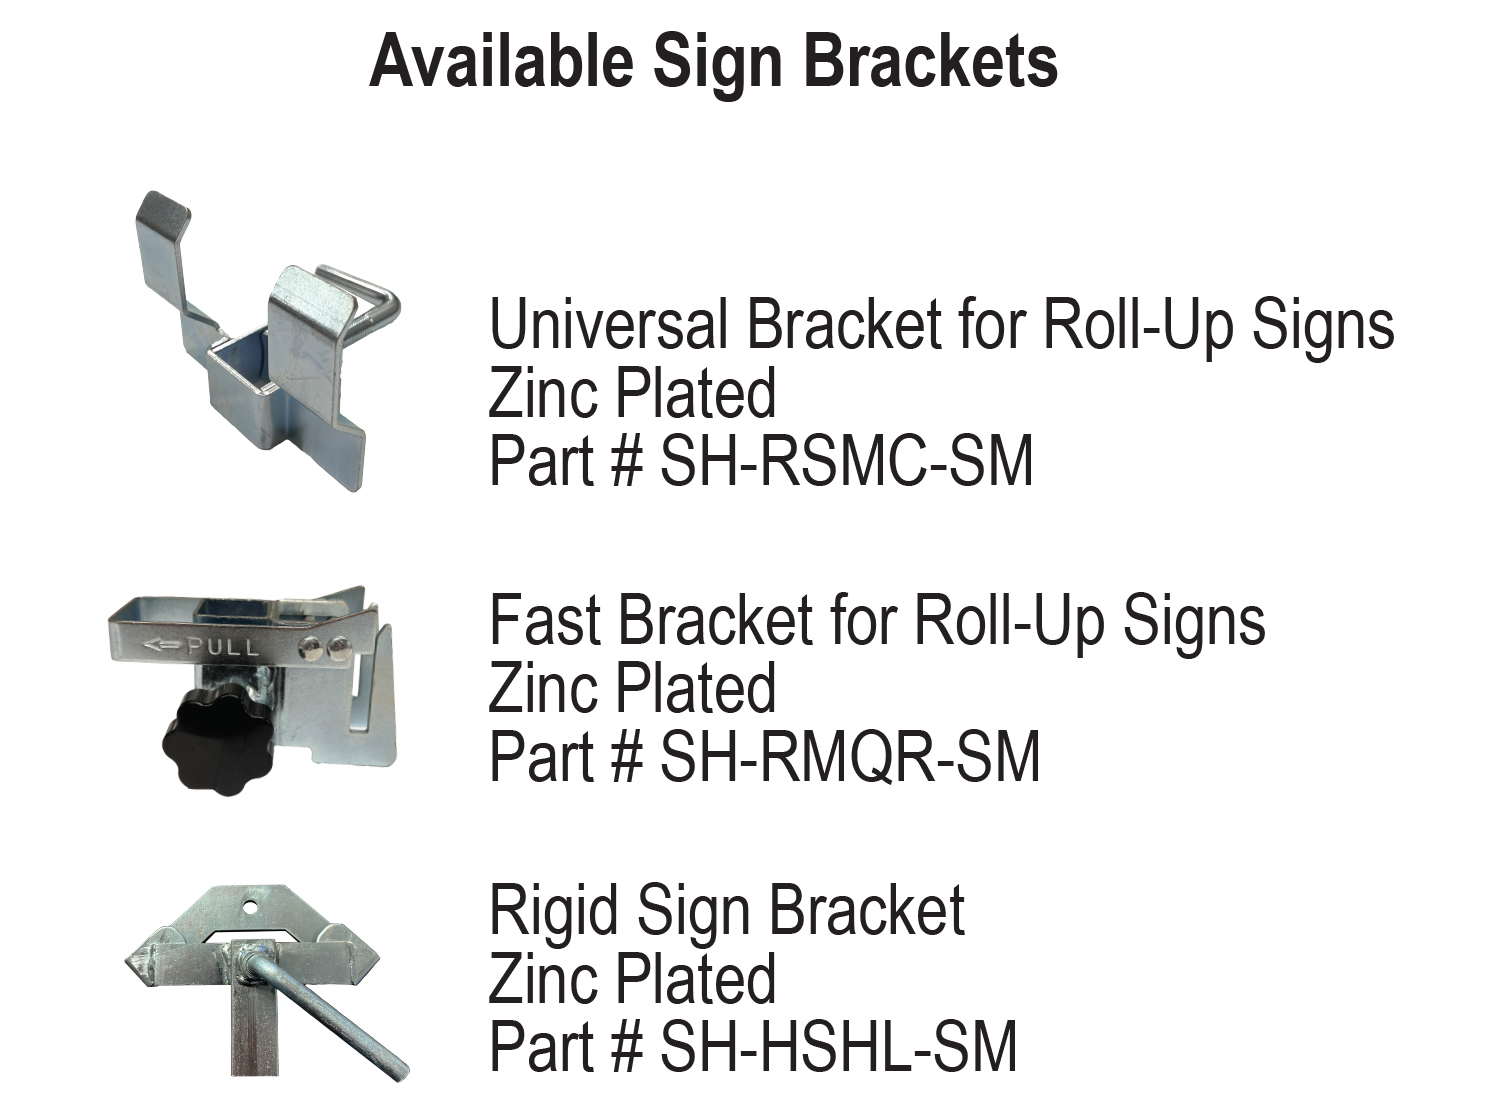 Available Sign Brackets for SS440